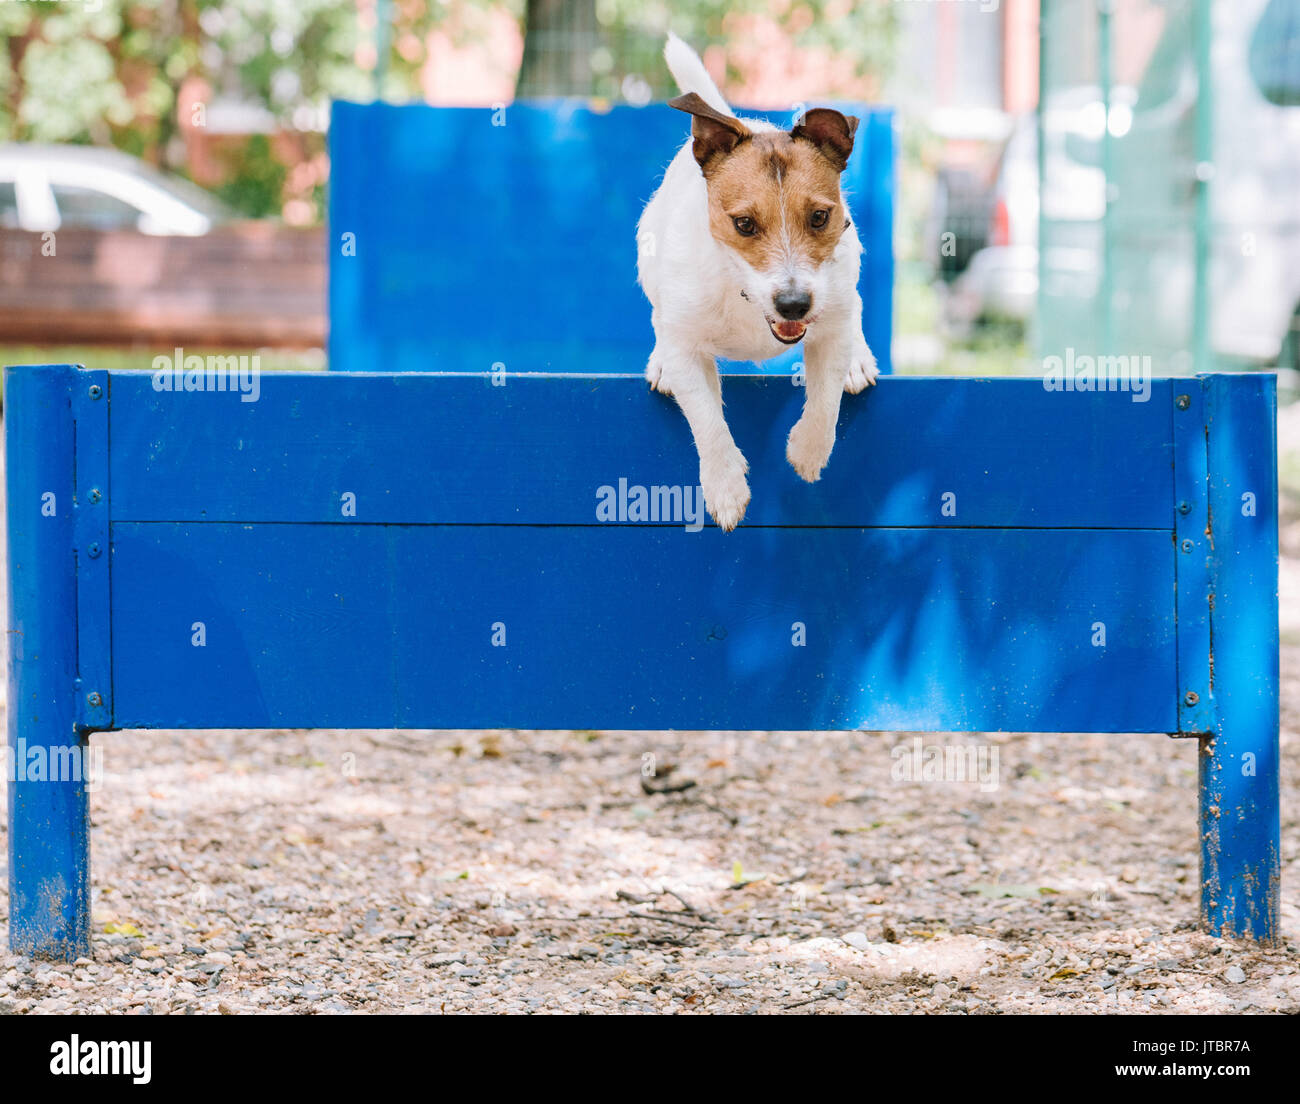 Dog training to jump over hurdle at doggy park Stock Photo